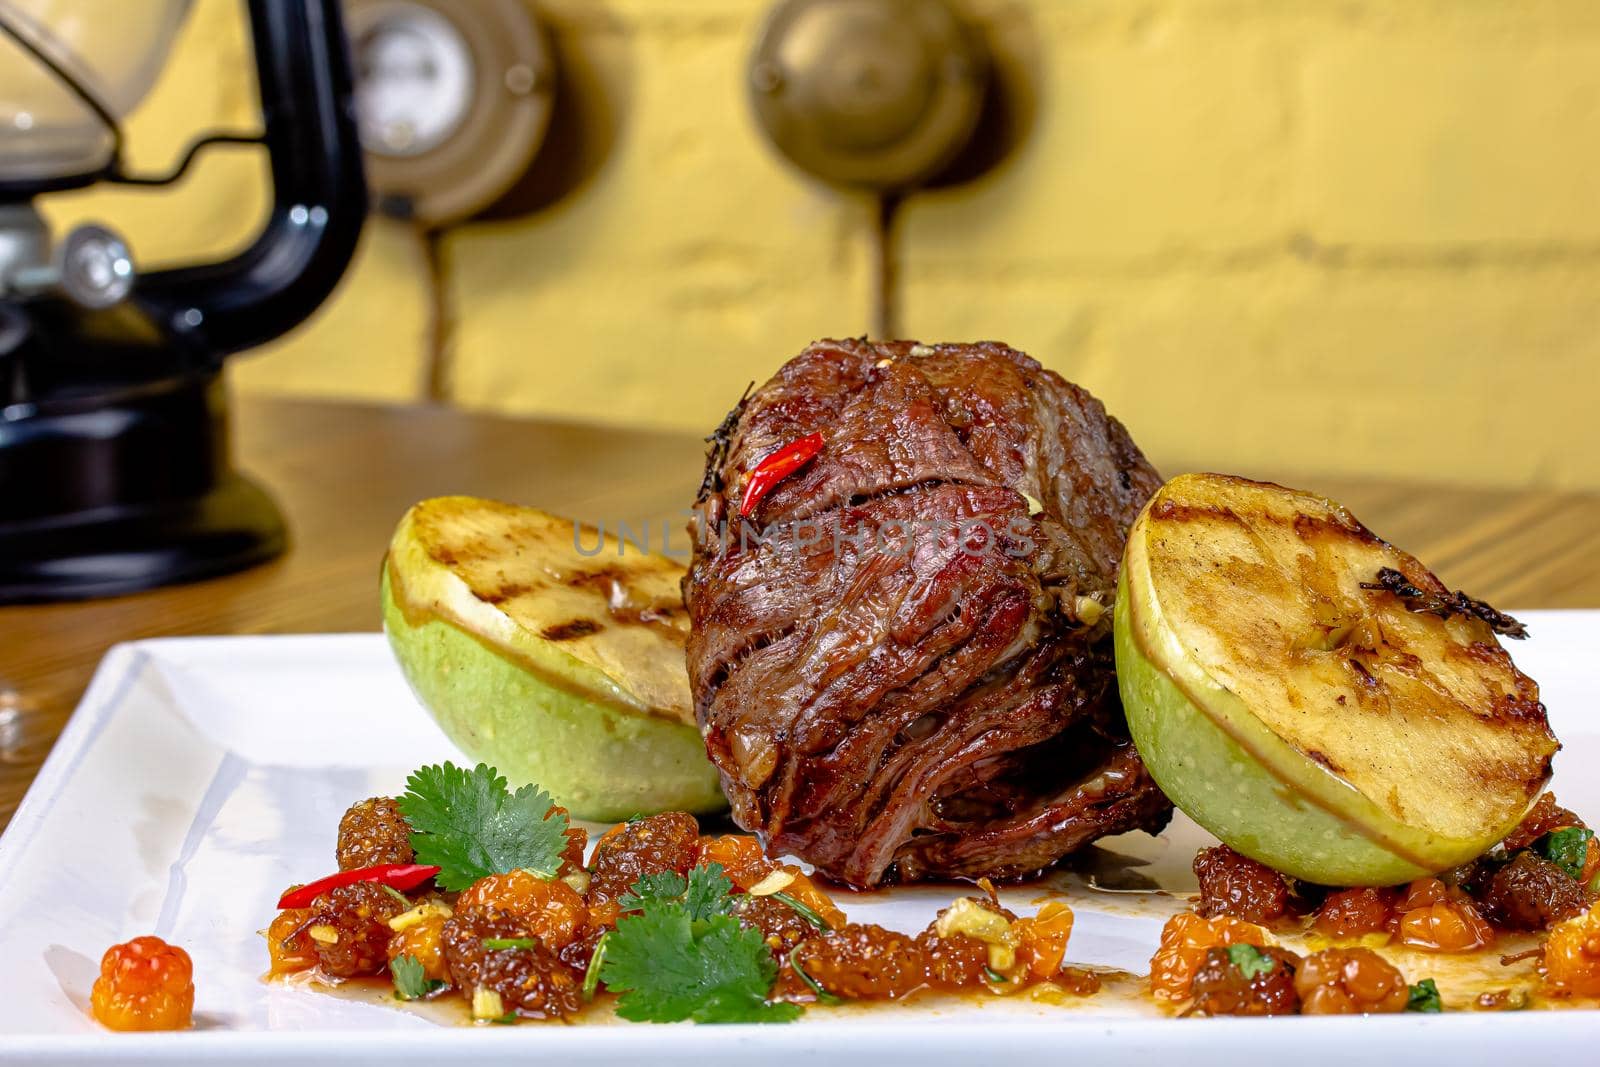 meat savory : beef fillet mignon grilled and garnished with baked apples and tomatoes by Milanchikov